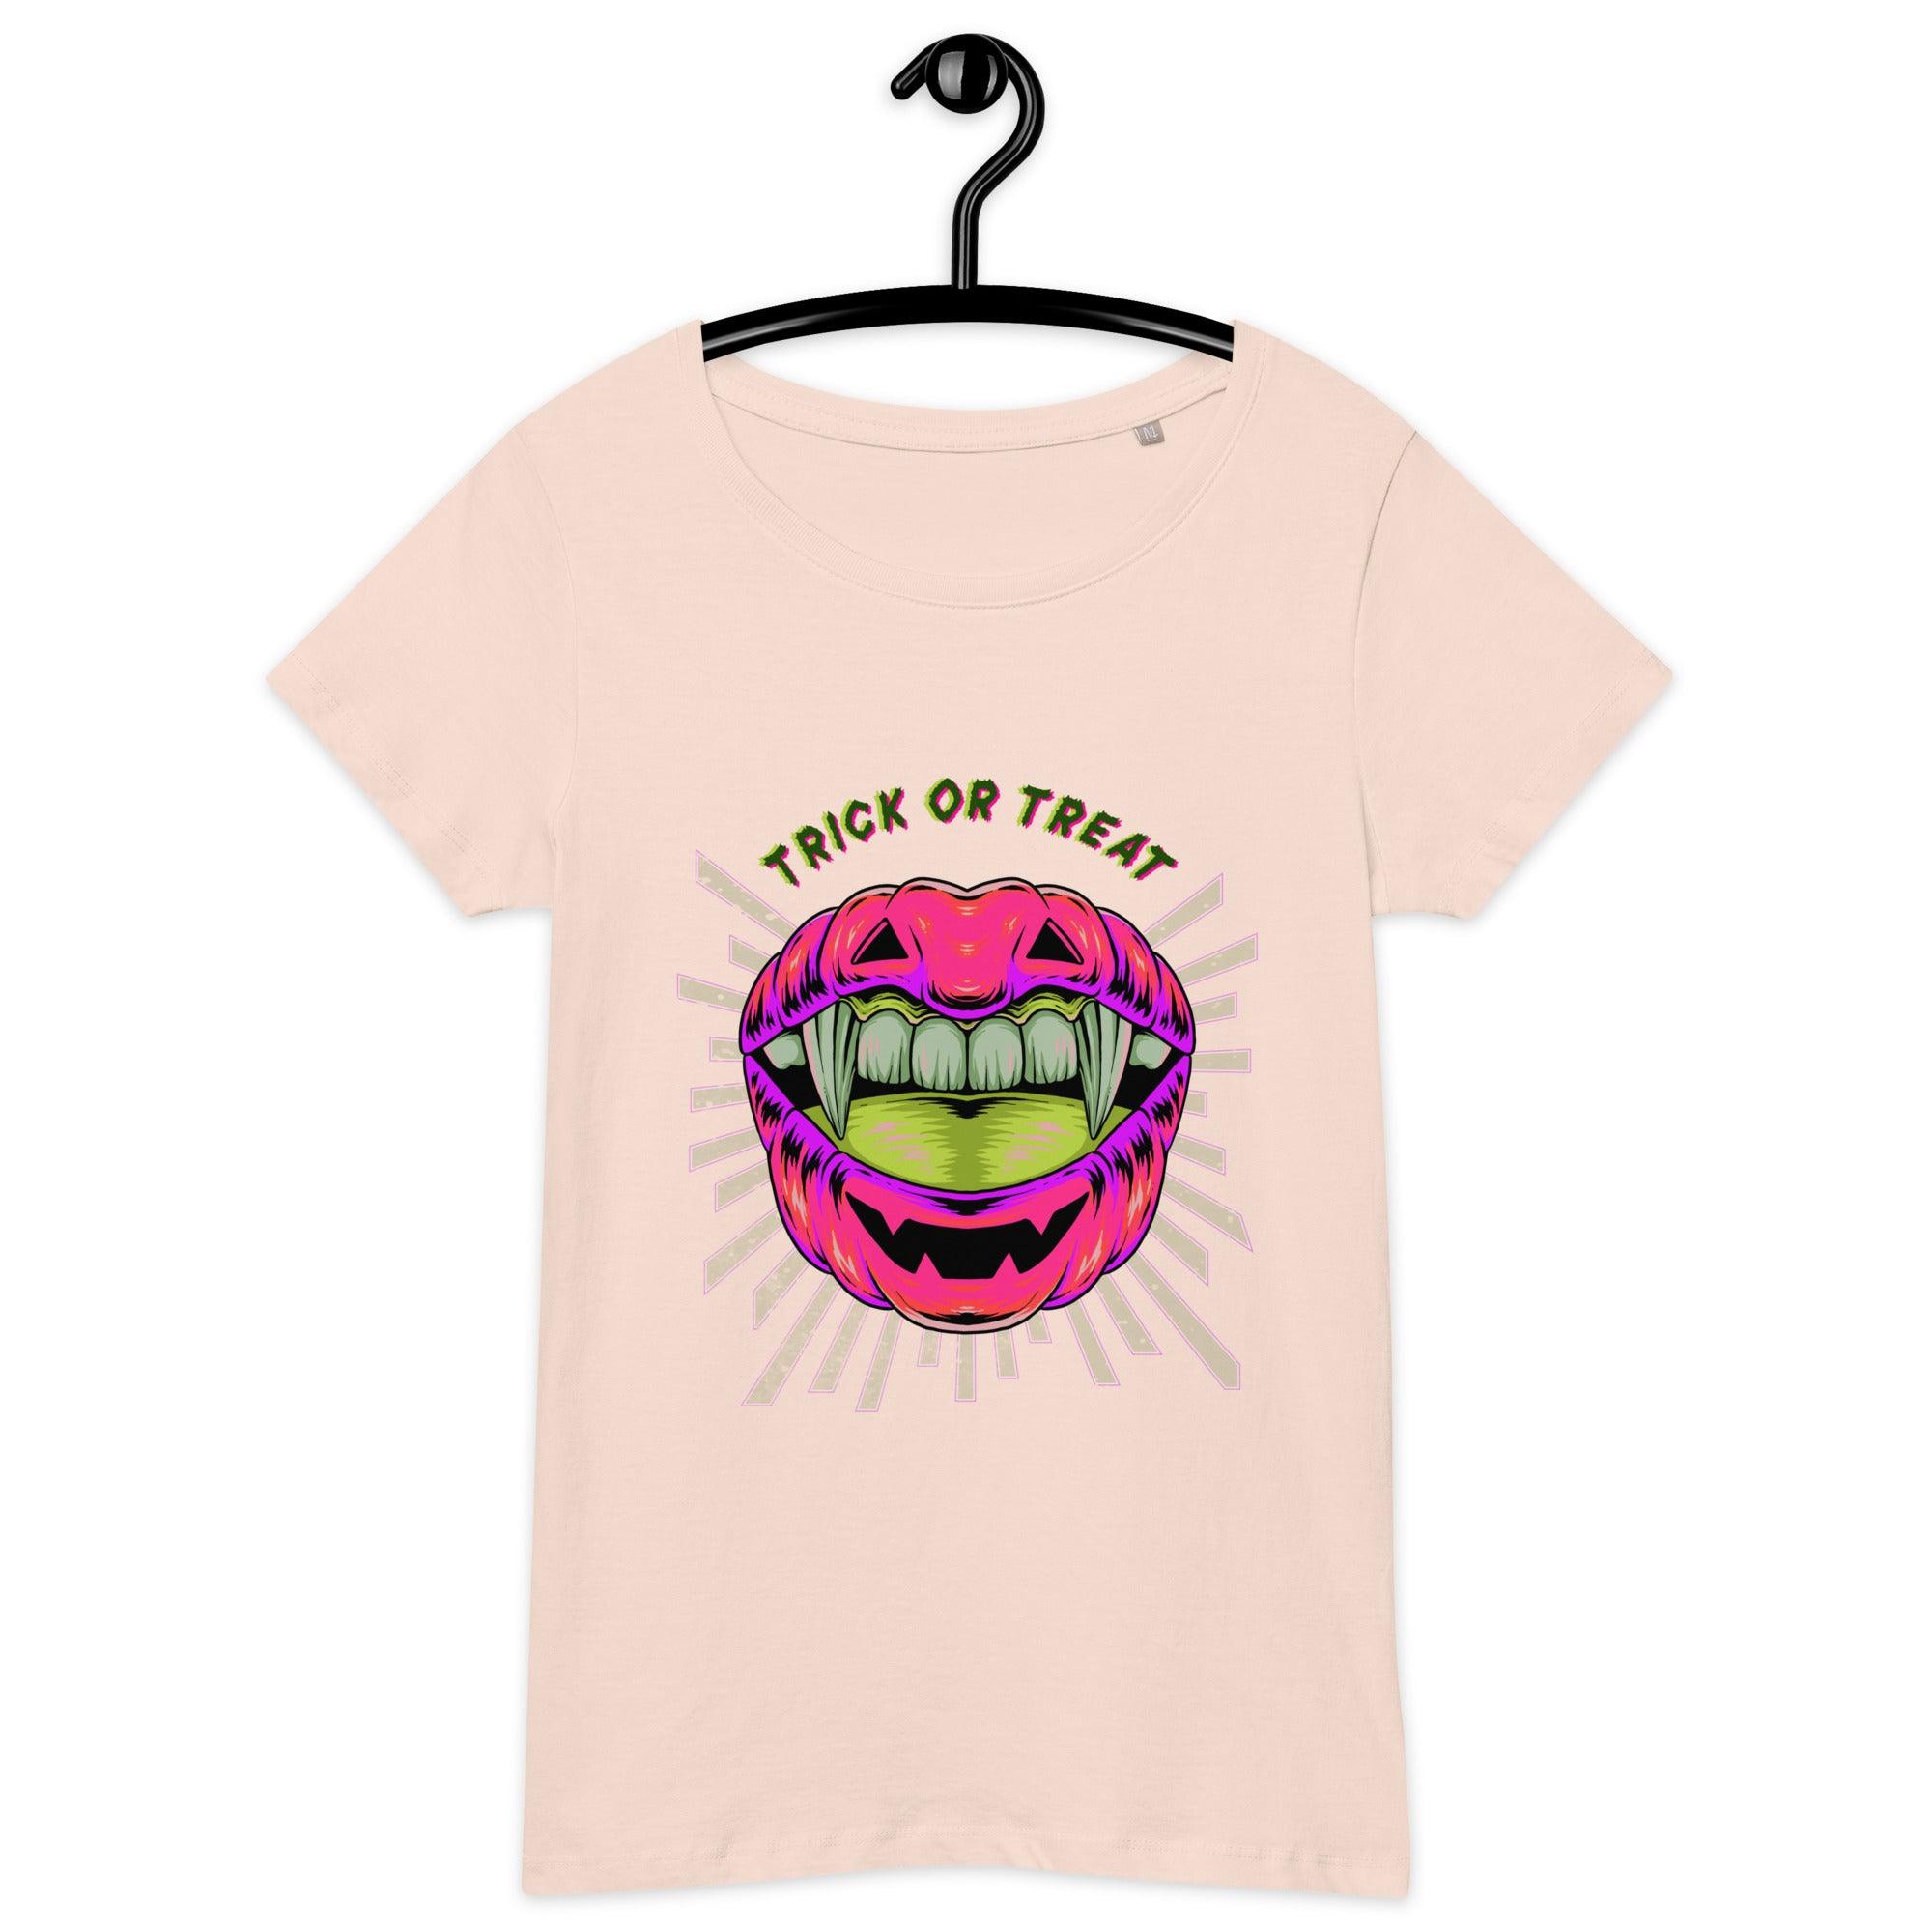 Vibrant organic pumpkin patch tee for women, celebrating Halloween with eco-friendly flair.